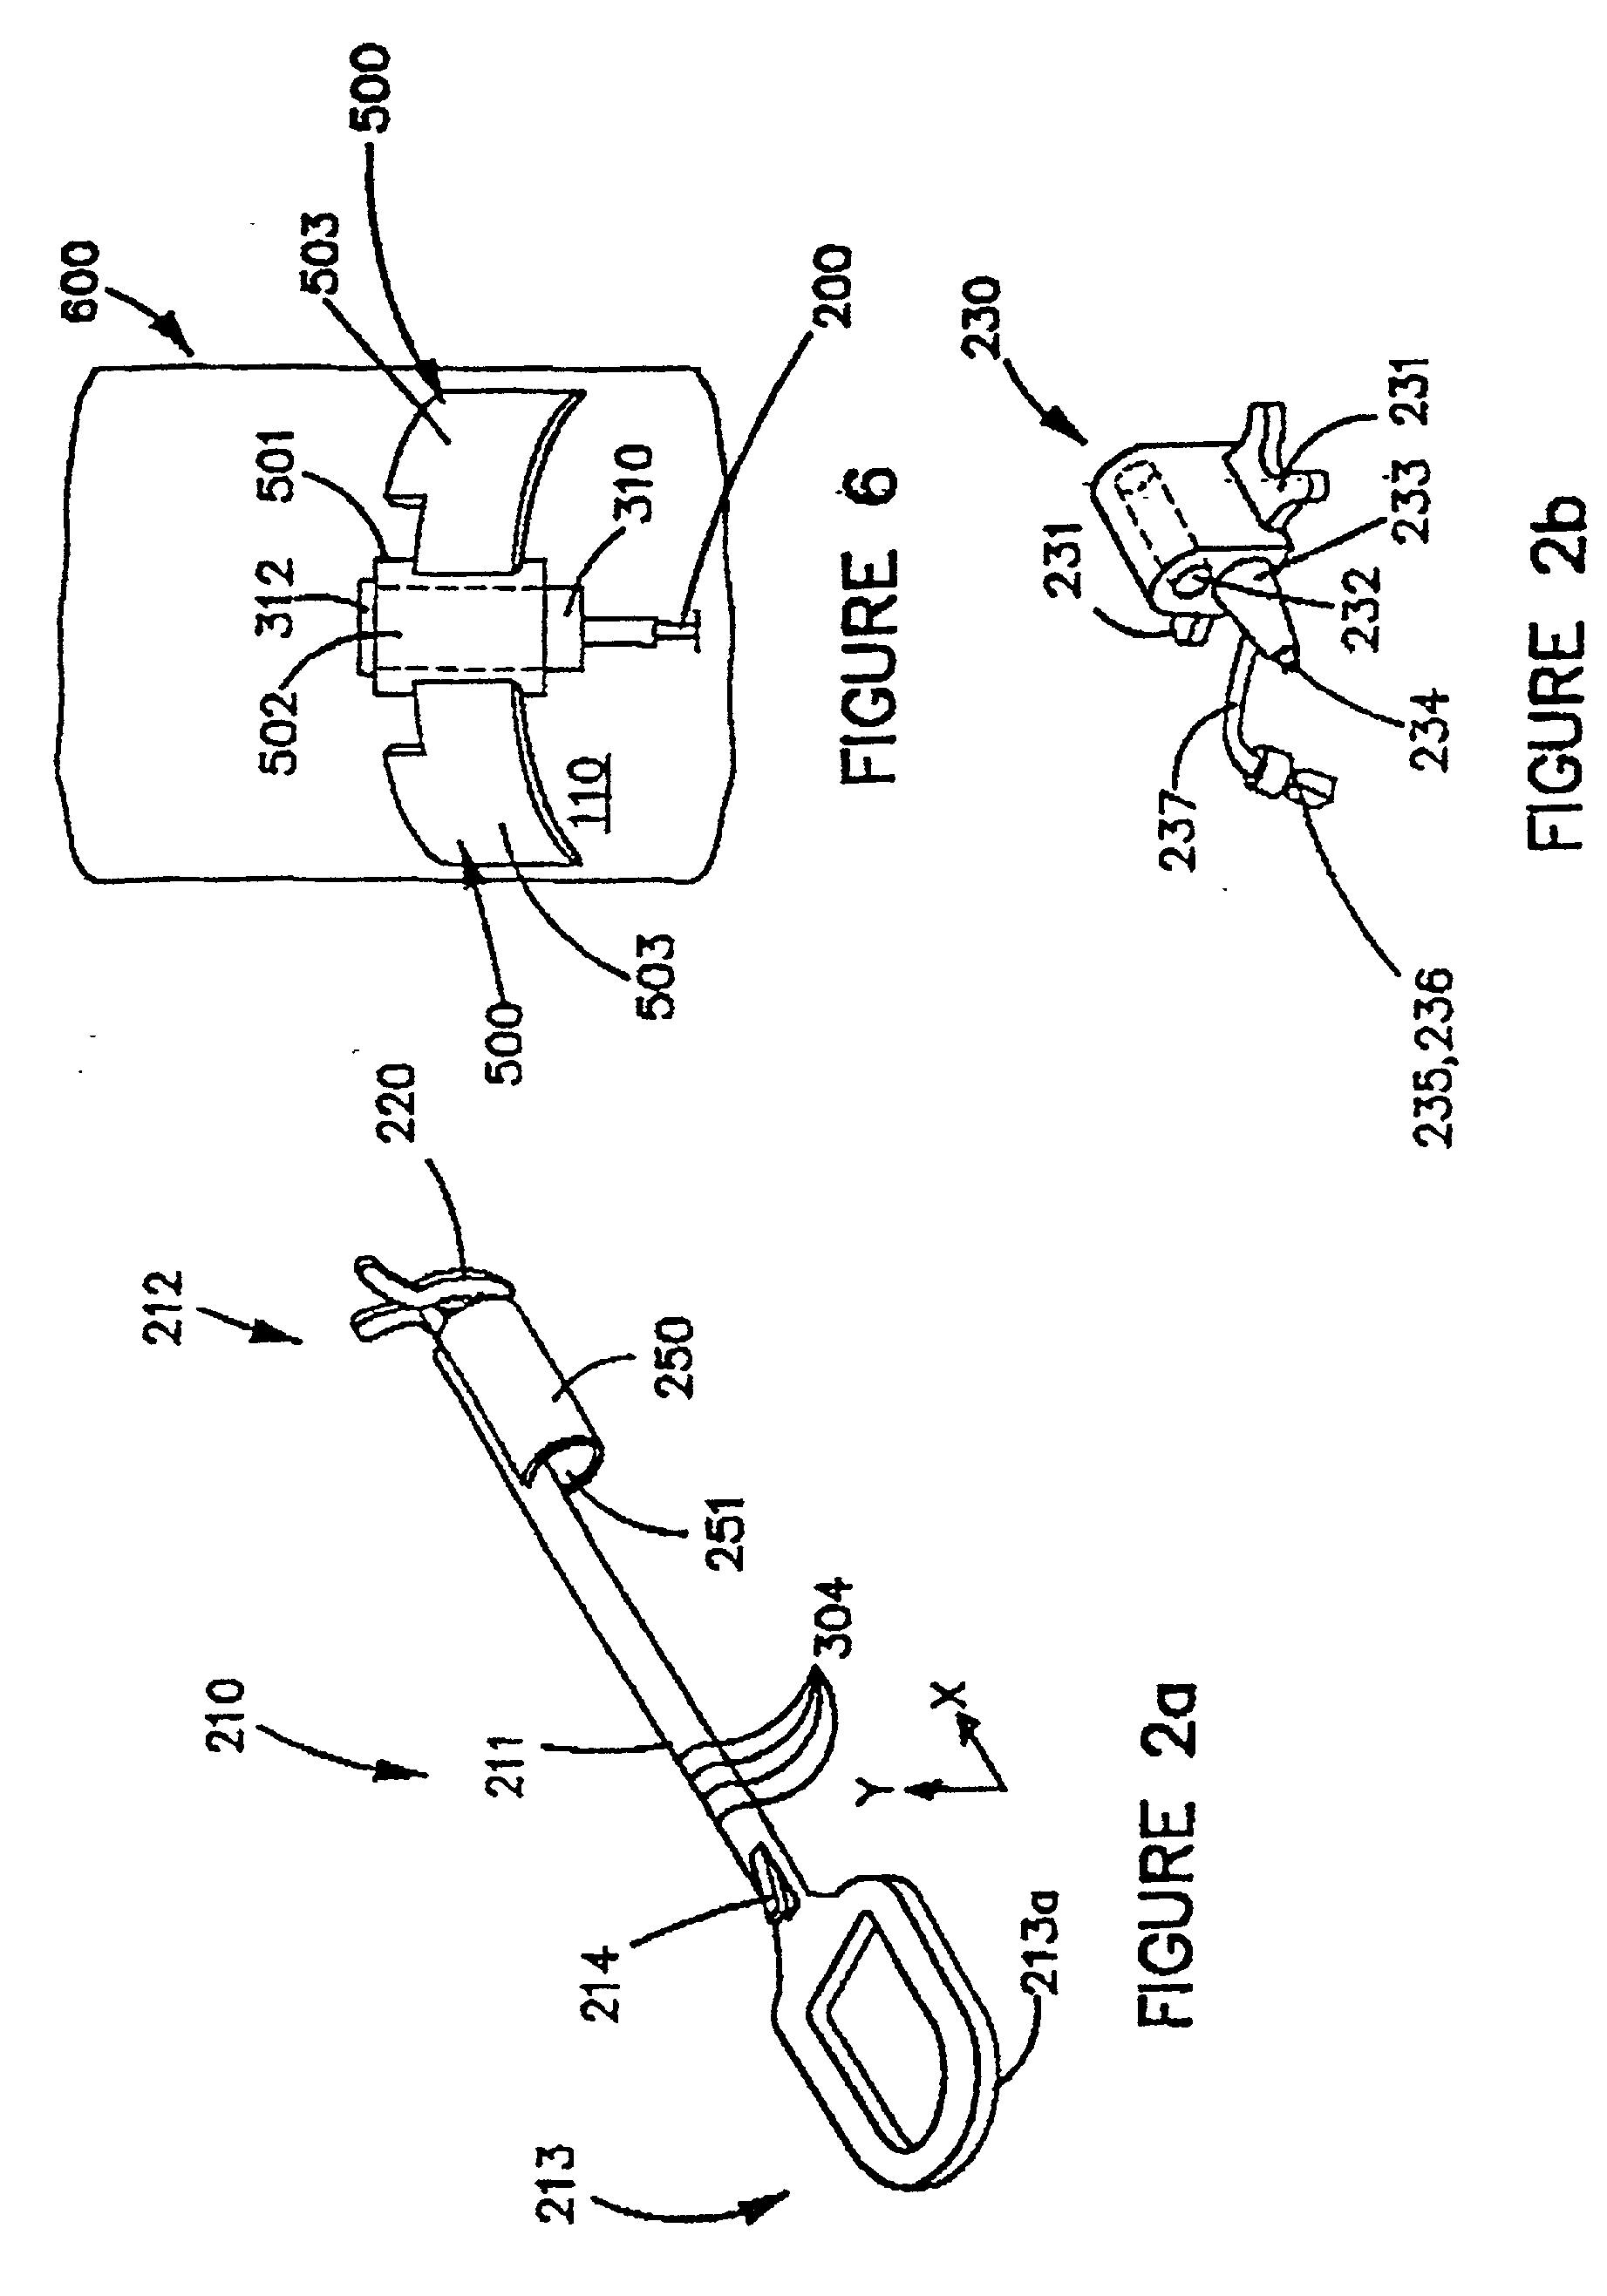 Apparatus and method for catheterization of blood vessels